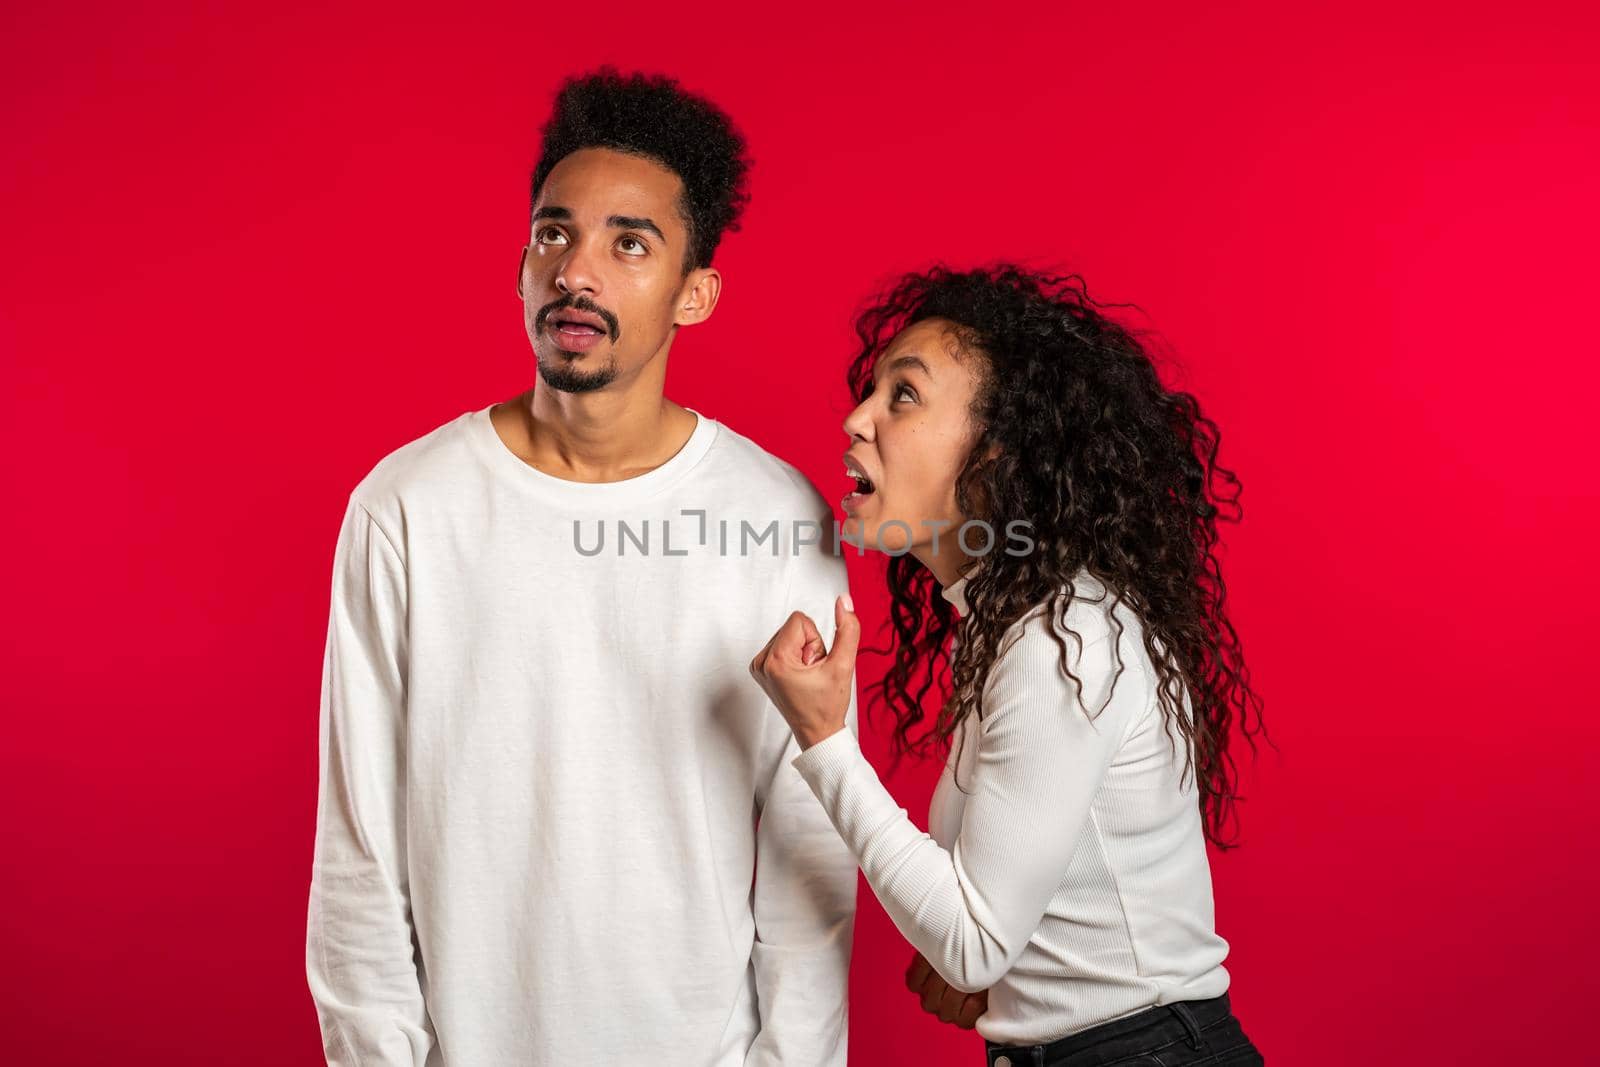 Young african woman emotionally screaming at her husband or boyfriend on red background in studio. Bored man rolling his eyes. Concept of conflict, problems in relationships